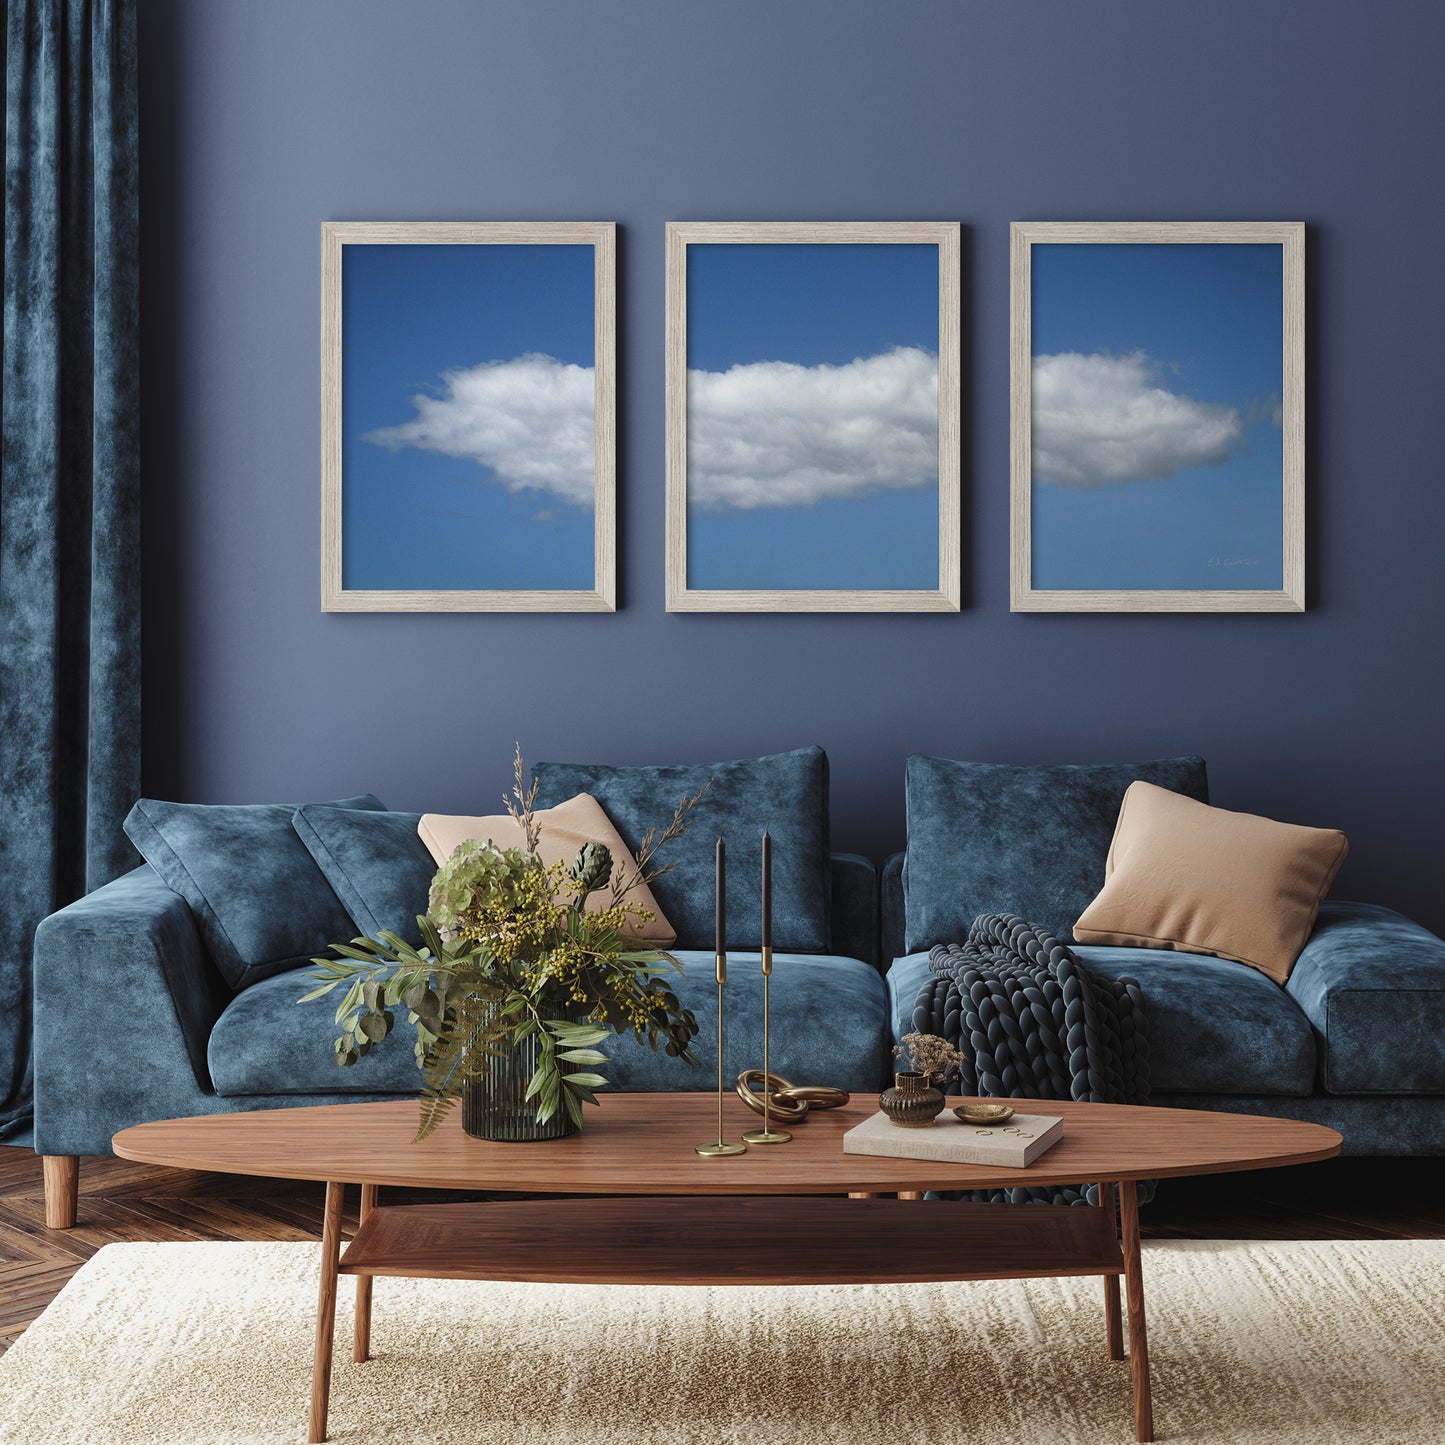 White Clouds by Ed Goldstein - 3 Piece Gallery Framed Print Art Set